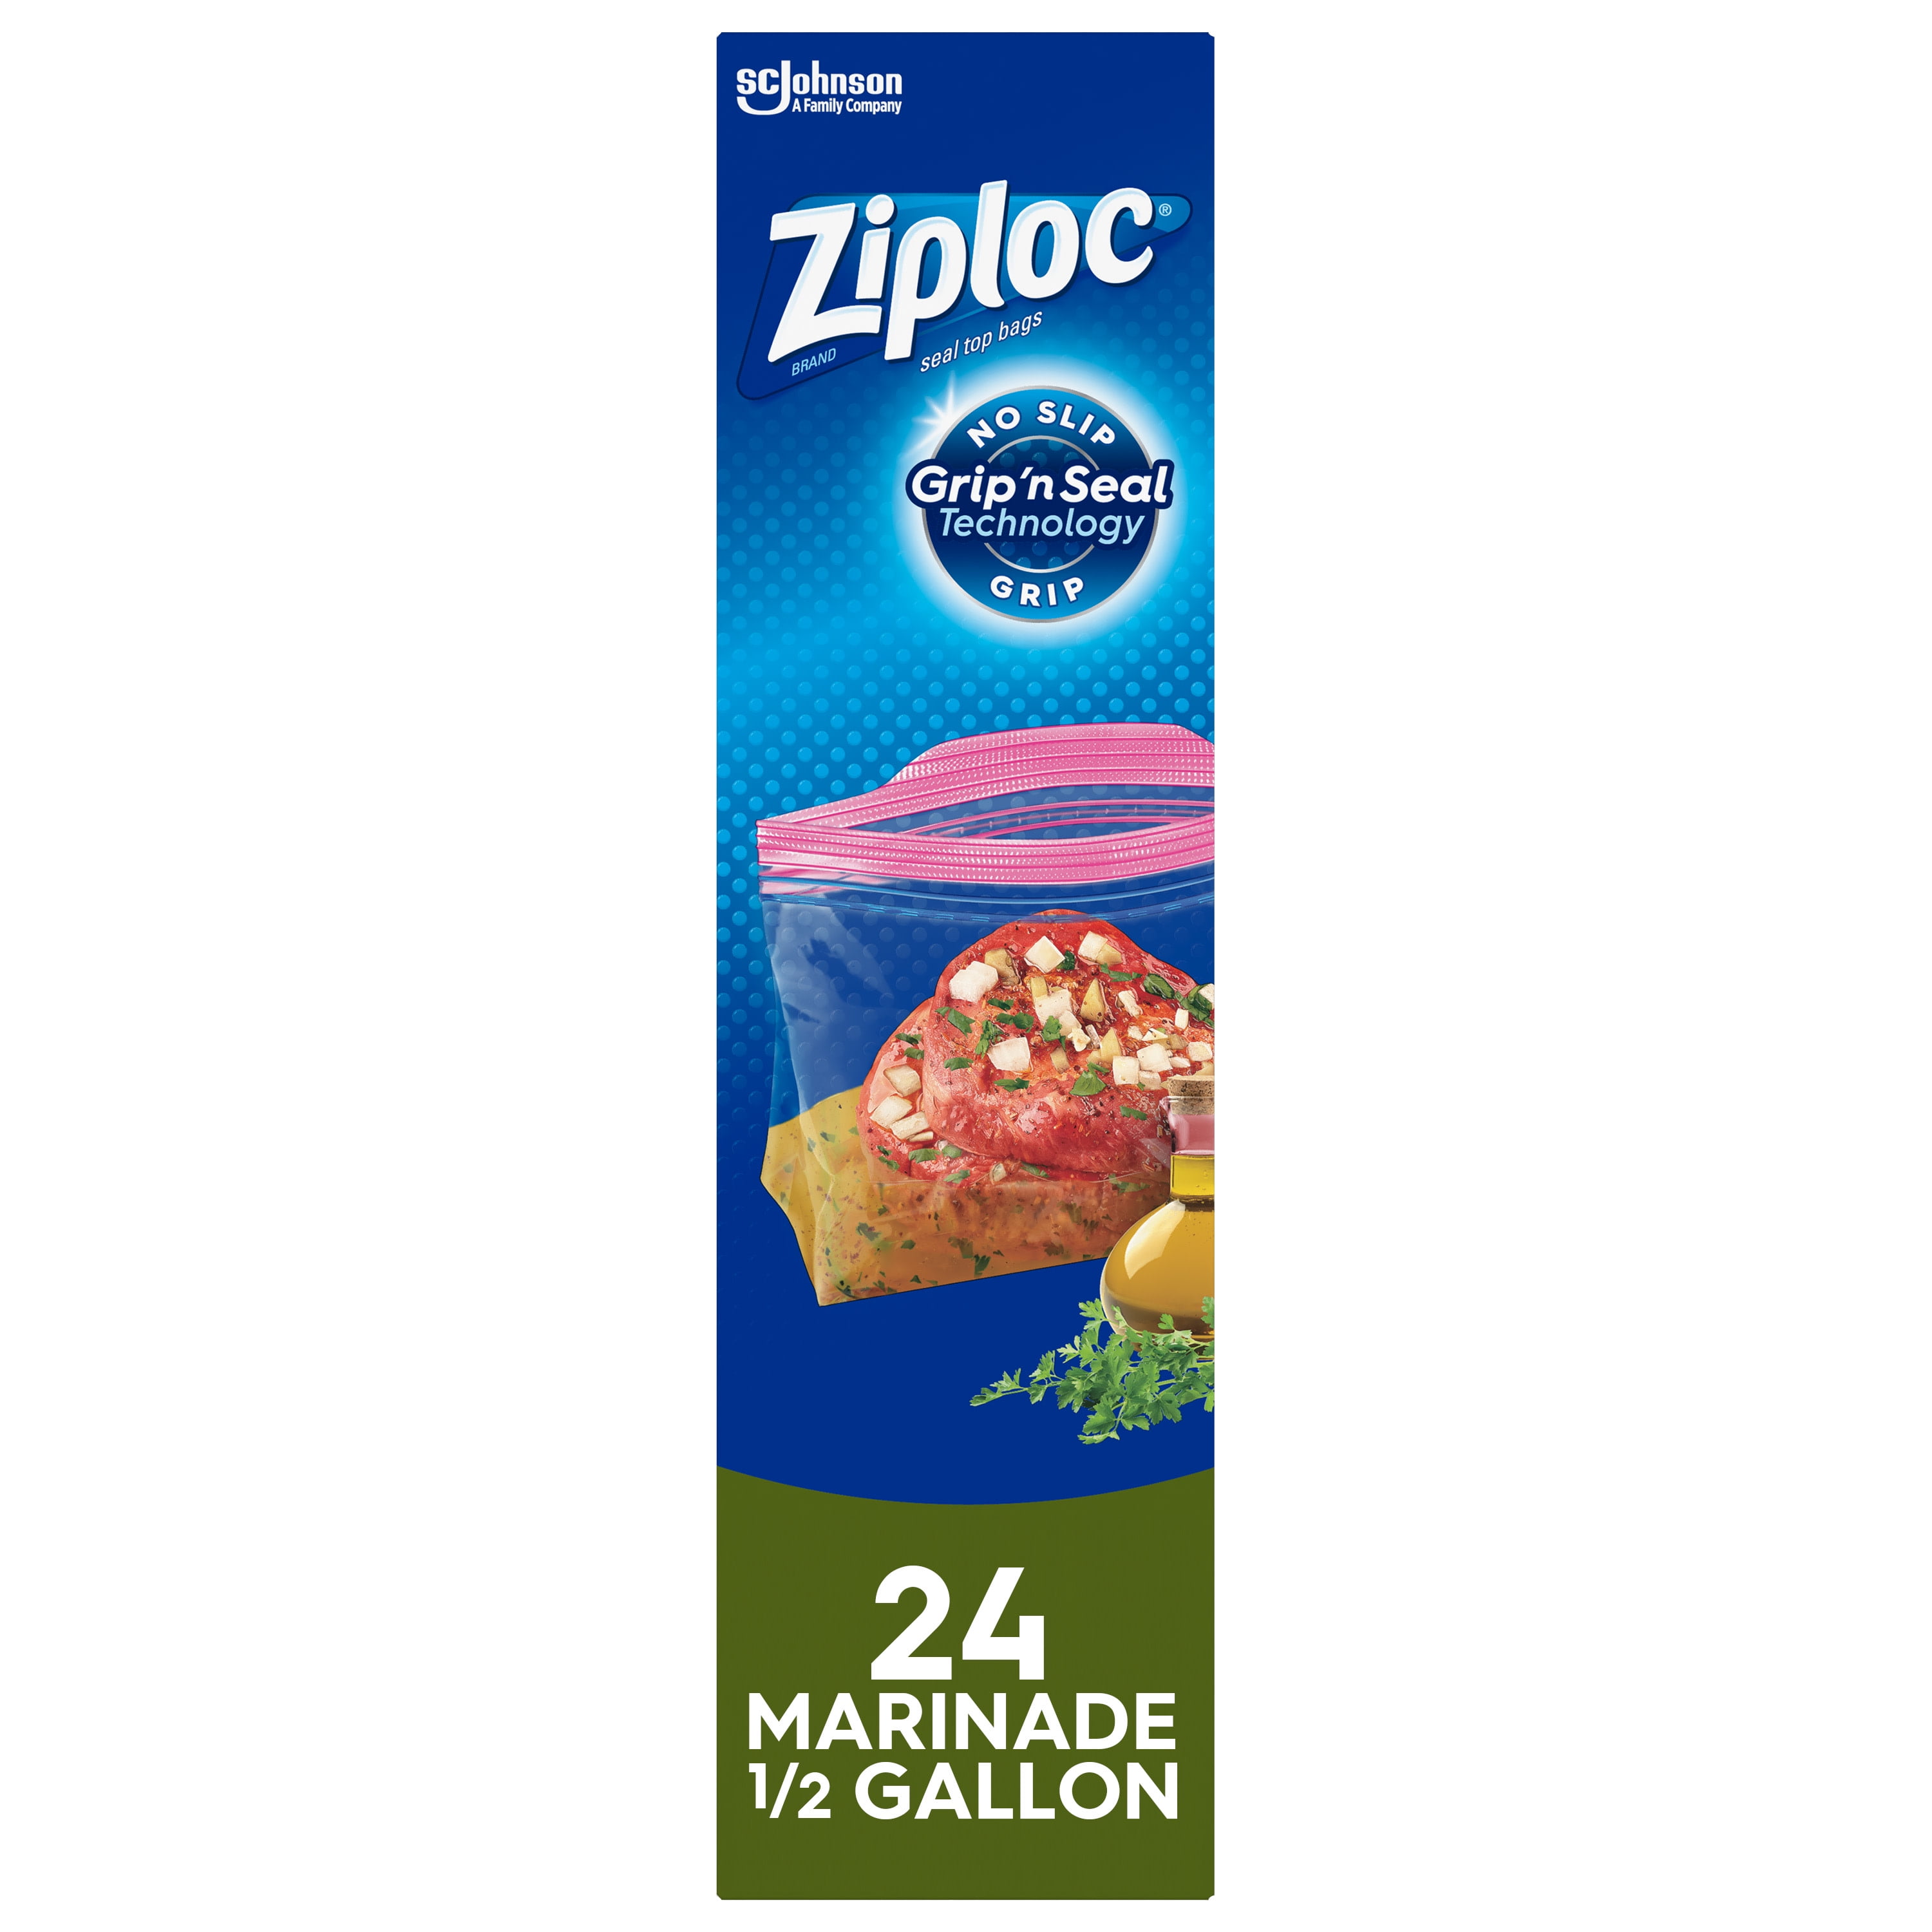 Ziploc® 2-Gallon Freezer Bags - Extra Large Size - 2 gal Capacity - 13  Width - Clear - 10/Box - Food, Money, Meat, Poultry, Fish, Soup